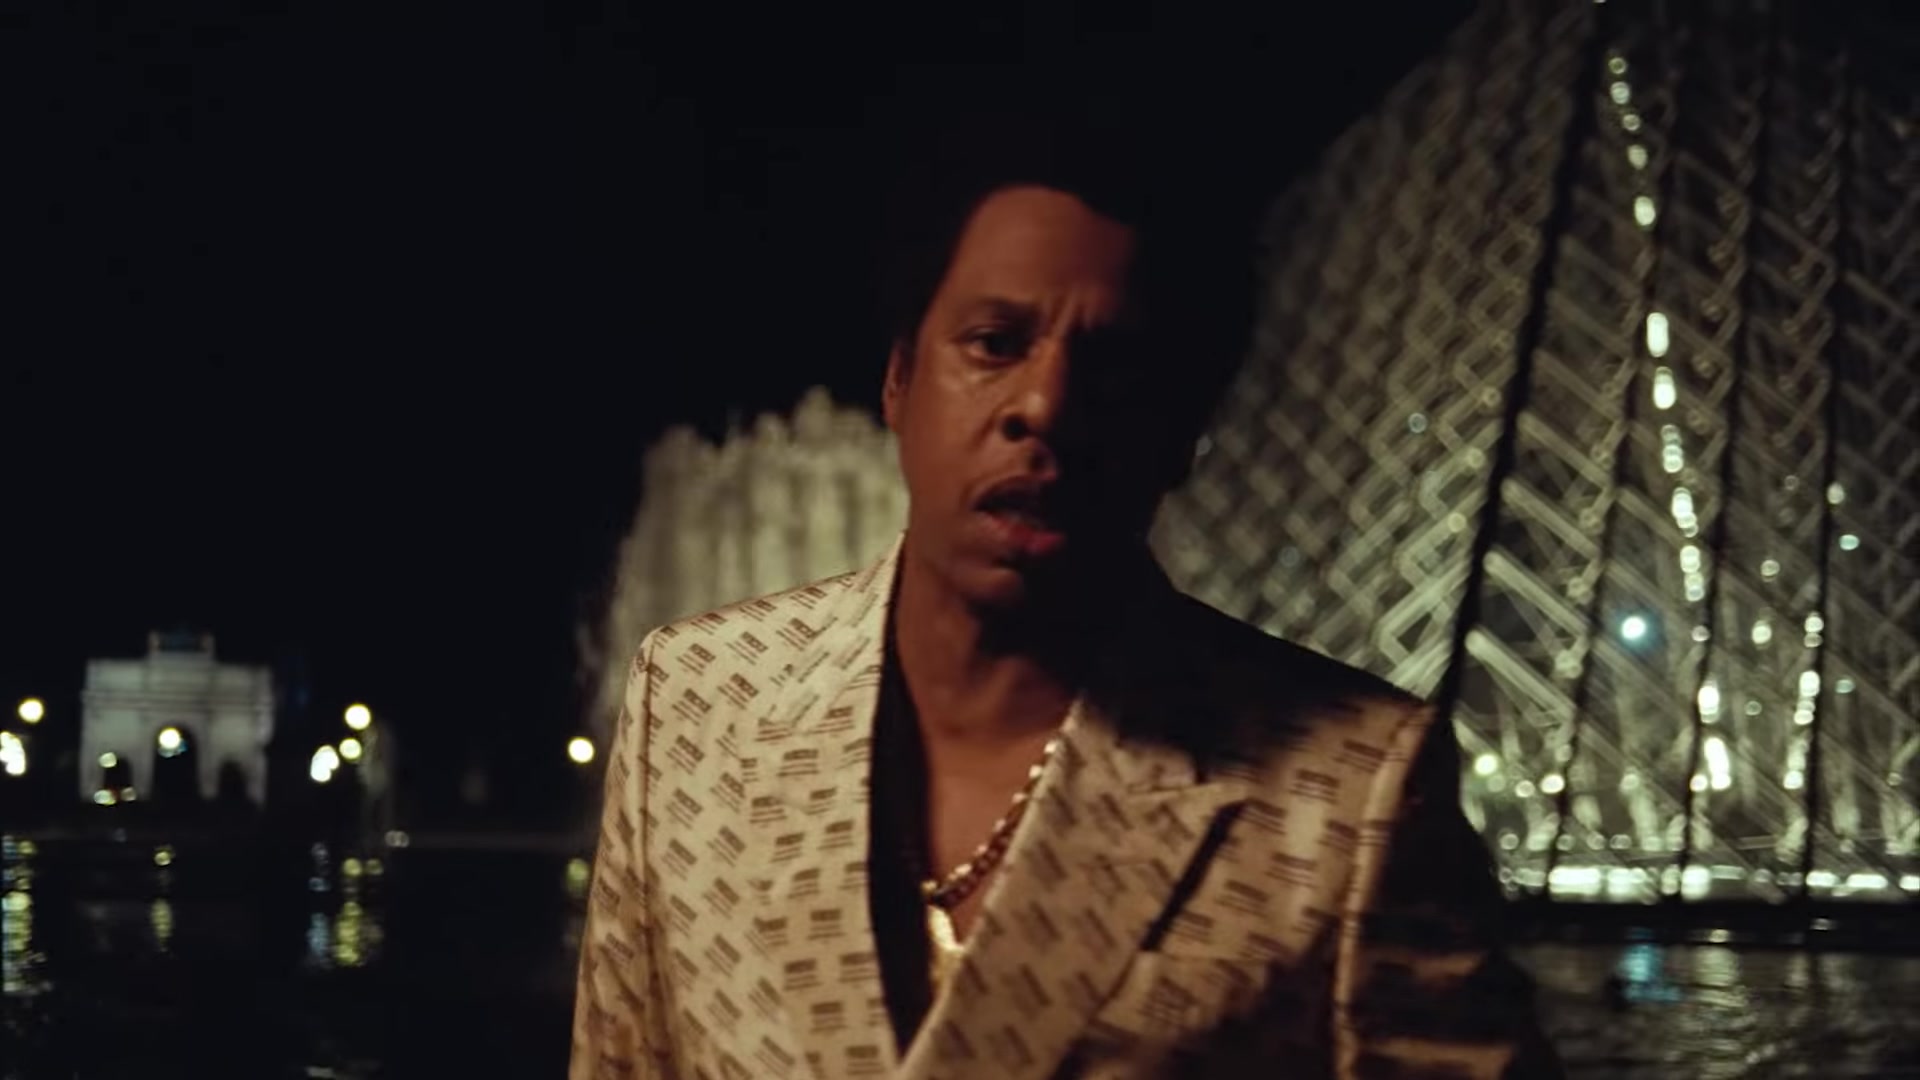 Gucci Jacket Worn by Jay-Z in “APESHIT” by The Carters (2018) Official Music Video